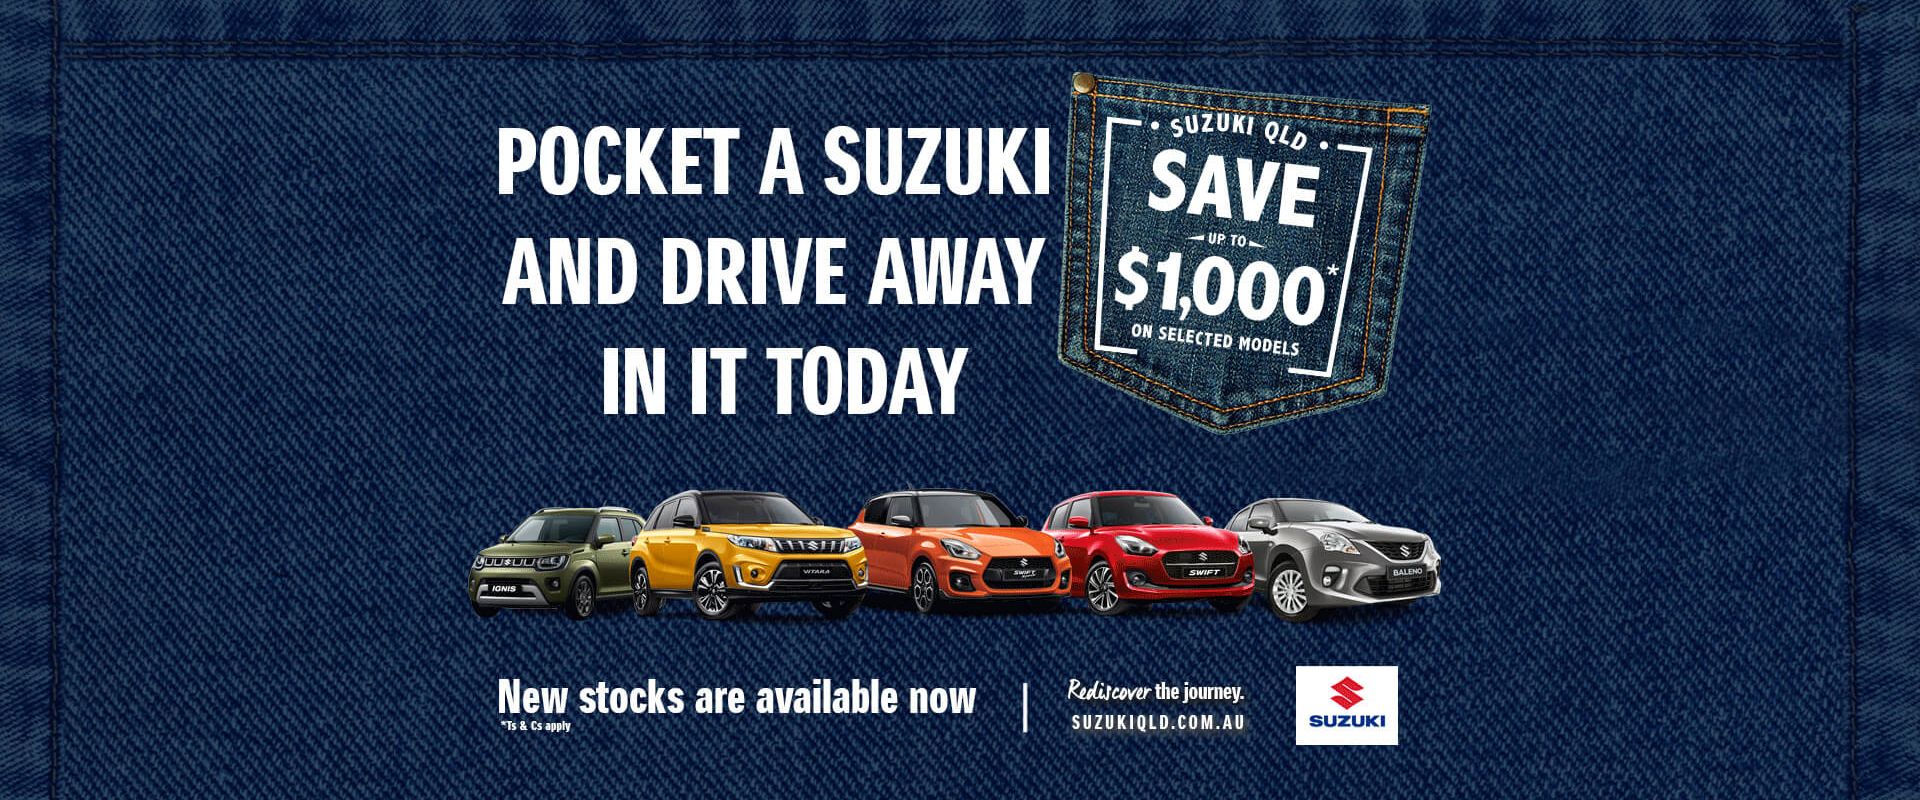 Pocket a Suzuki and drive away in it today.